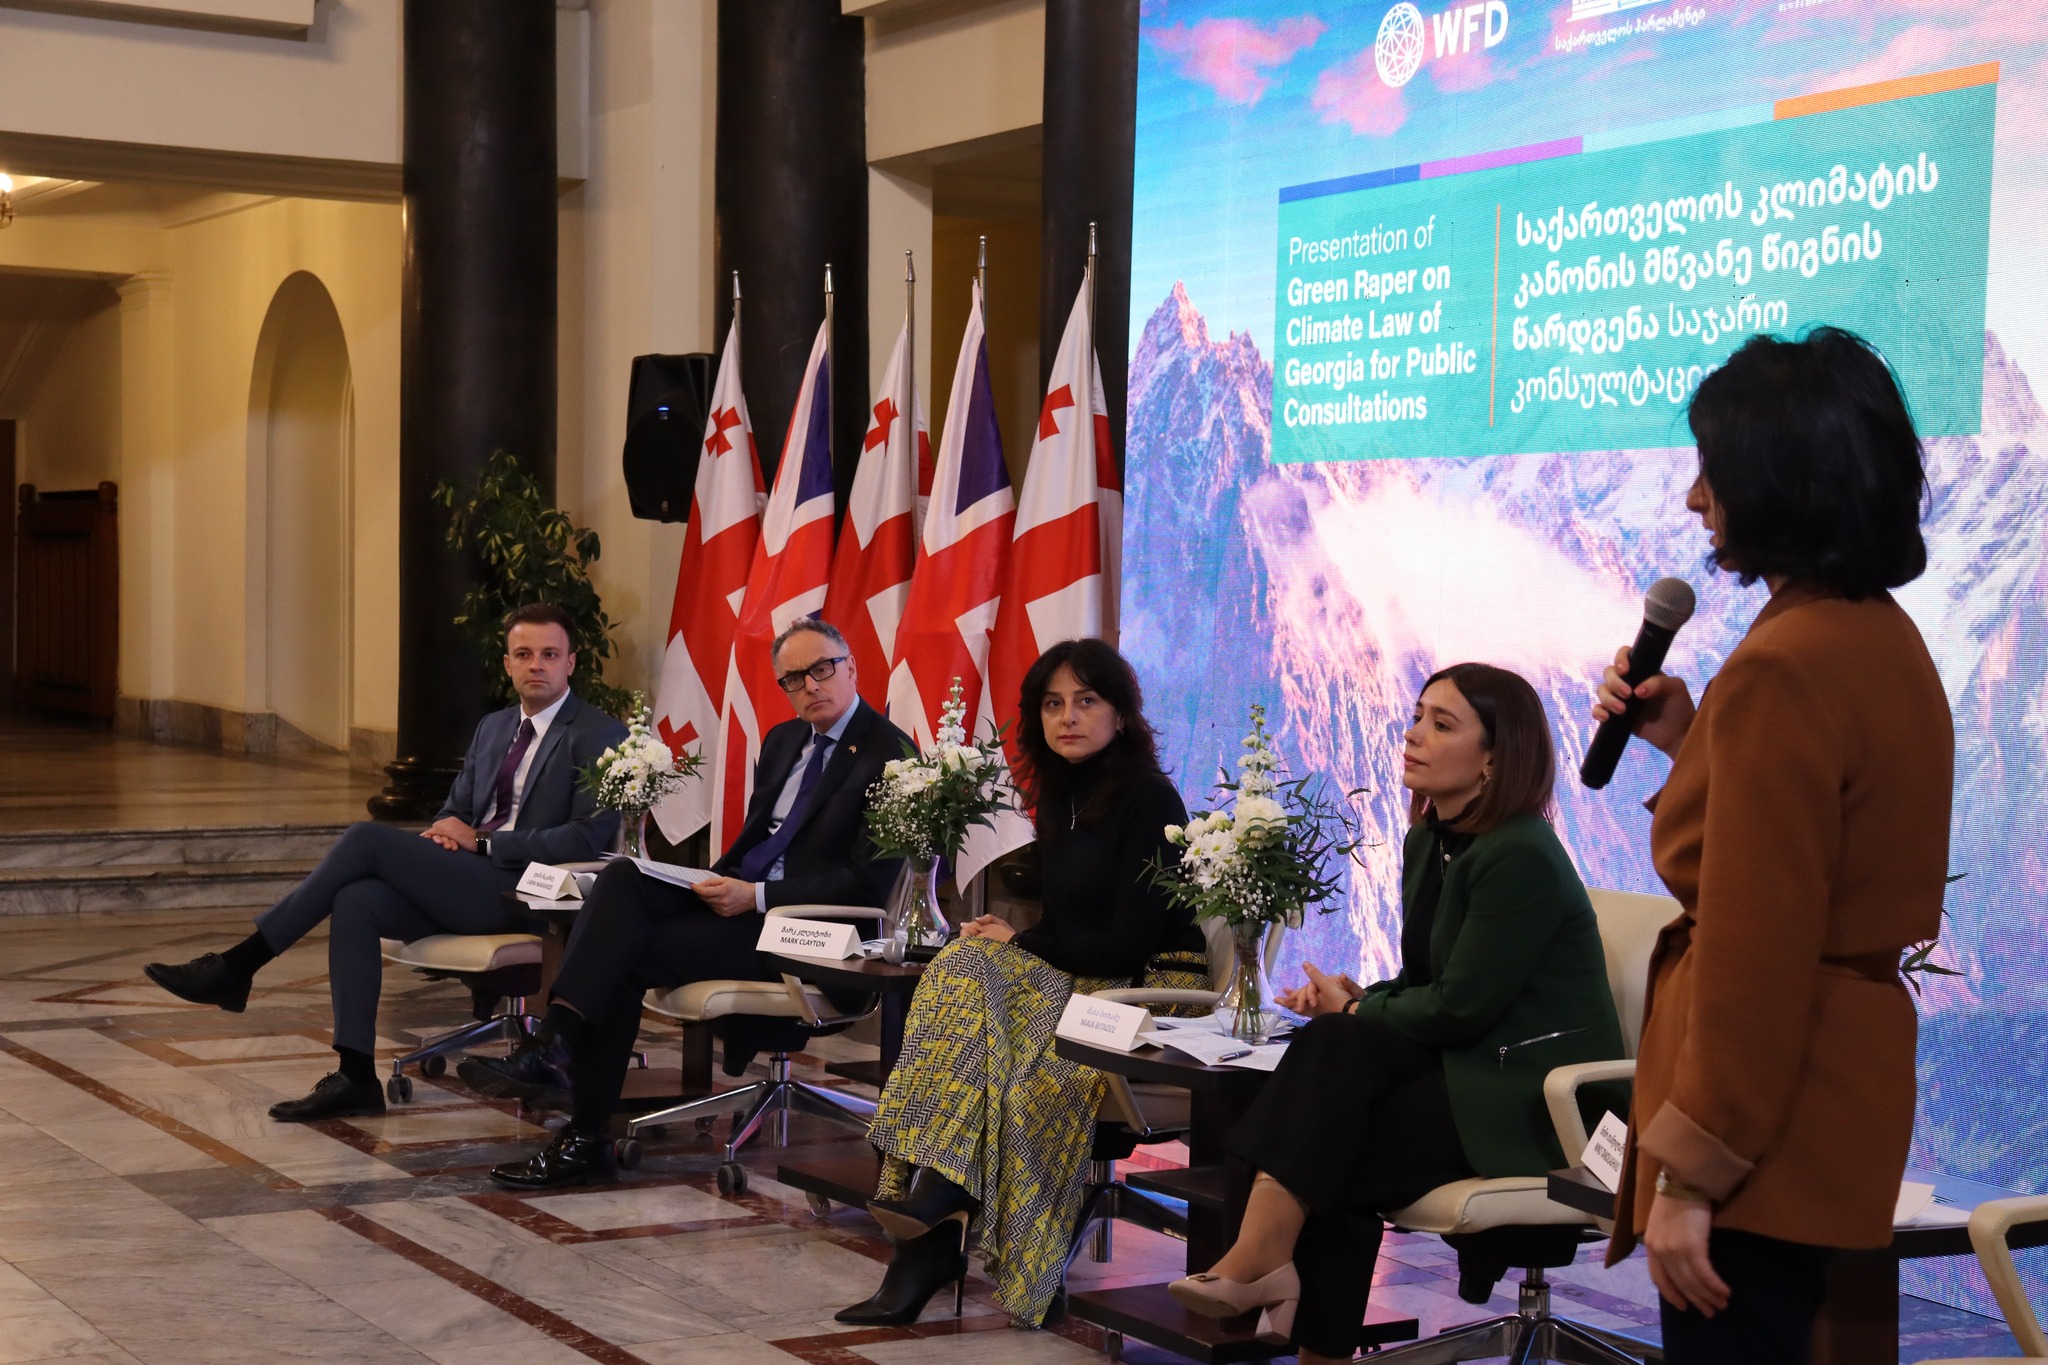 A woman speaks into a microphone at a panel event. In the background are an image of mountains and Georgian flags